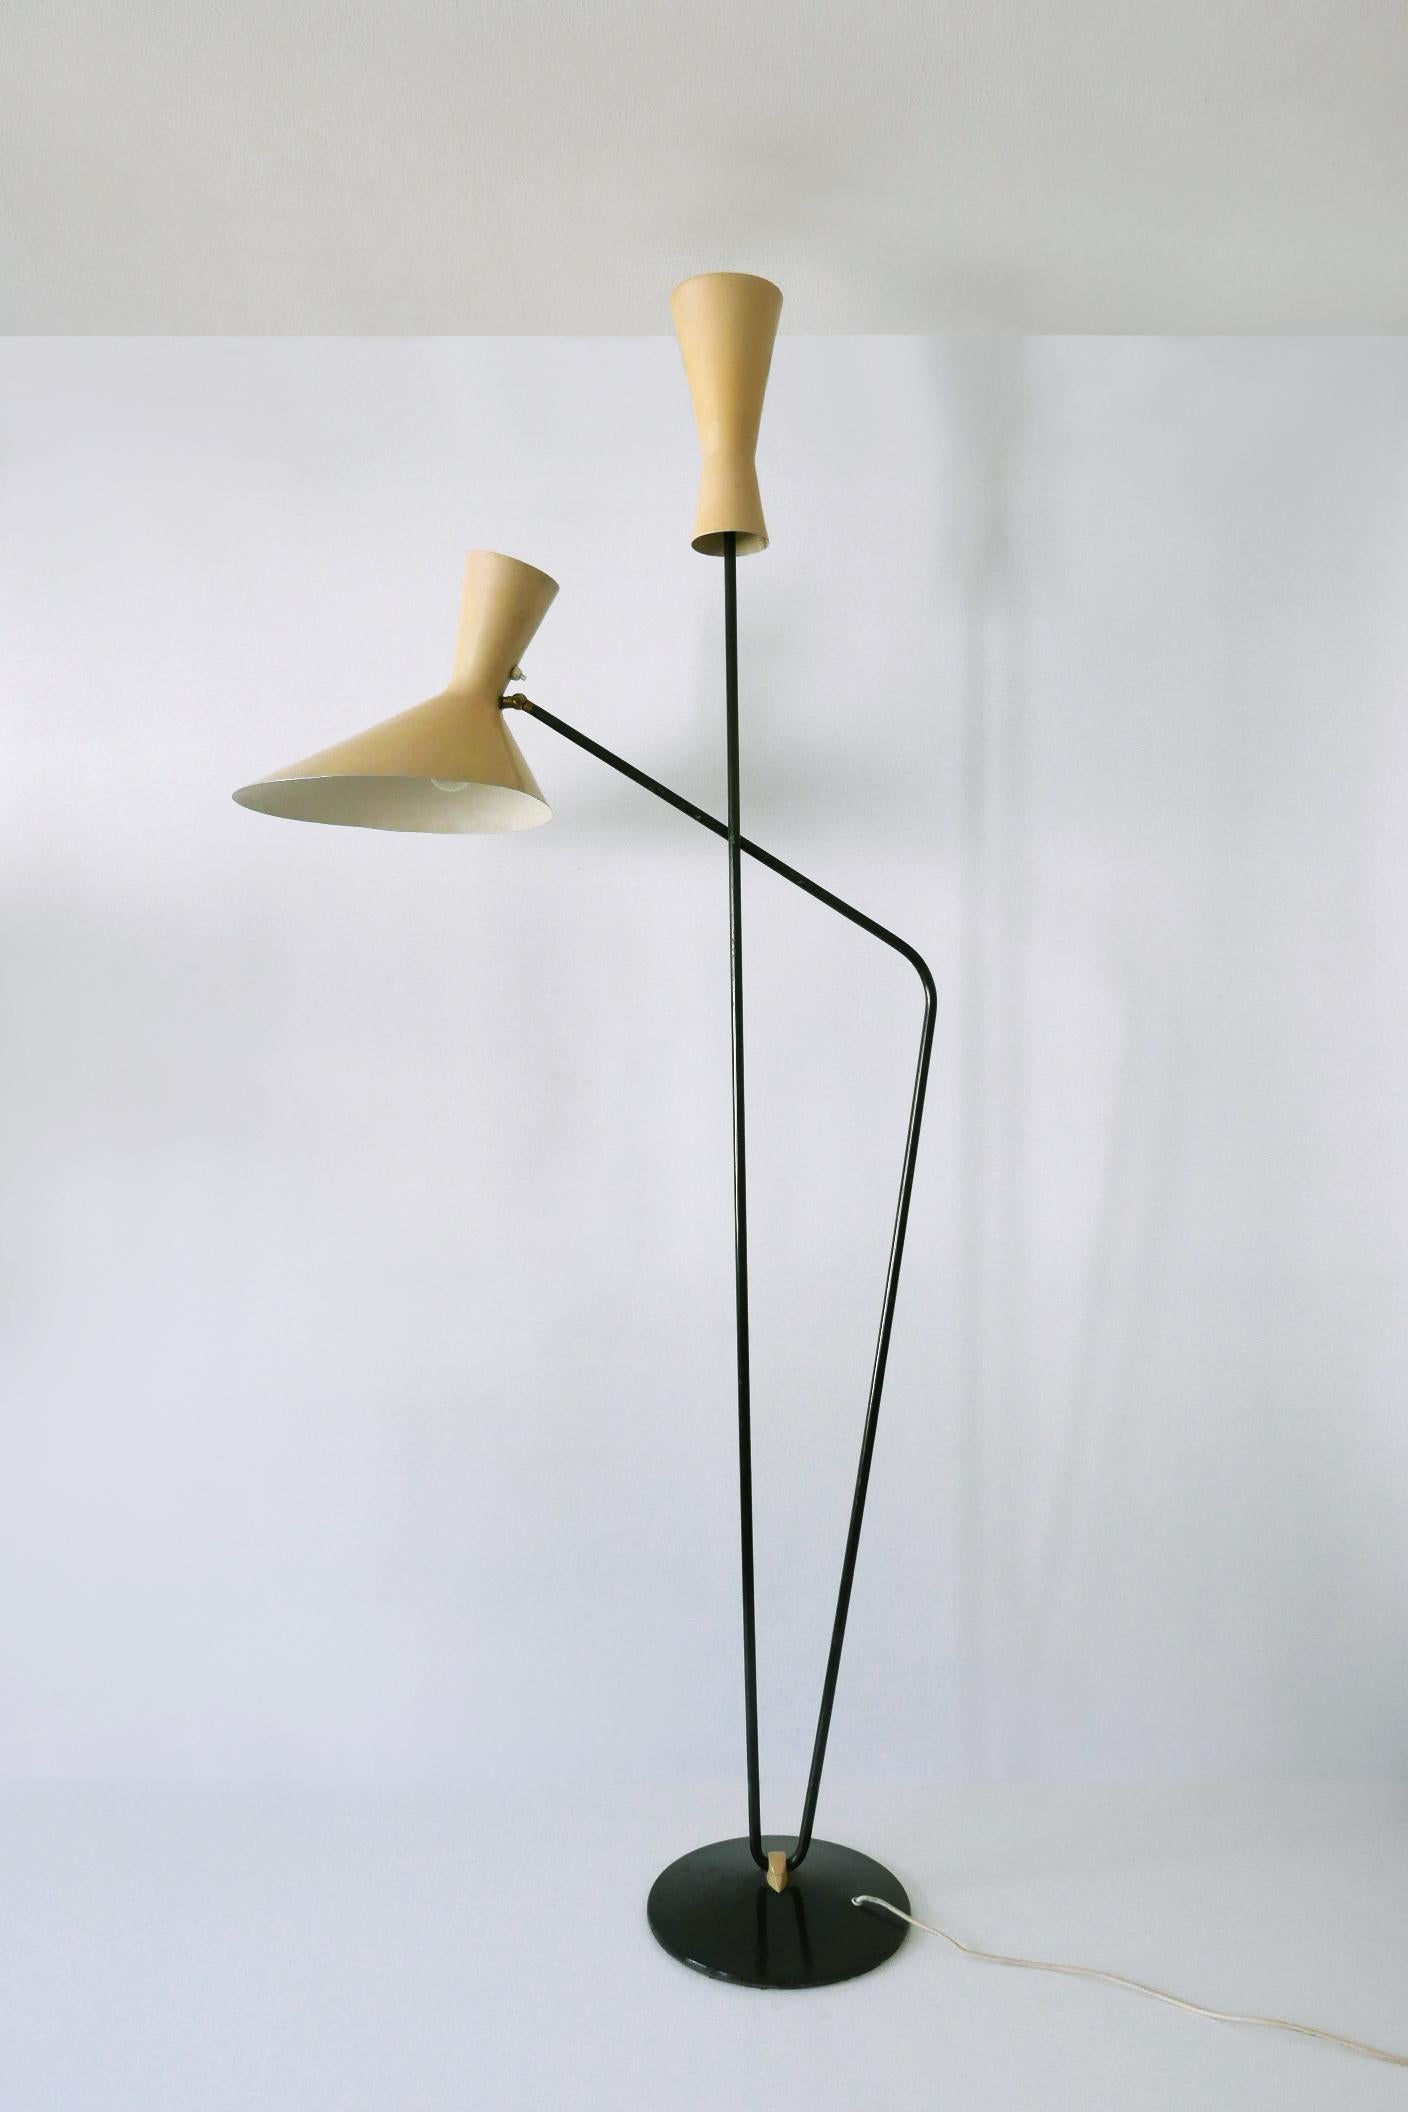 Rare Iconic Mid-Century Modern Floor Lamp by Prof. Carl Moor for BAG Turgi 1950s For Sale 1